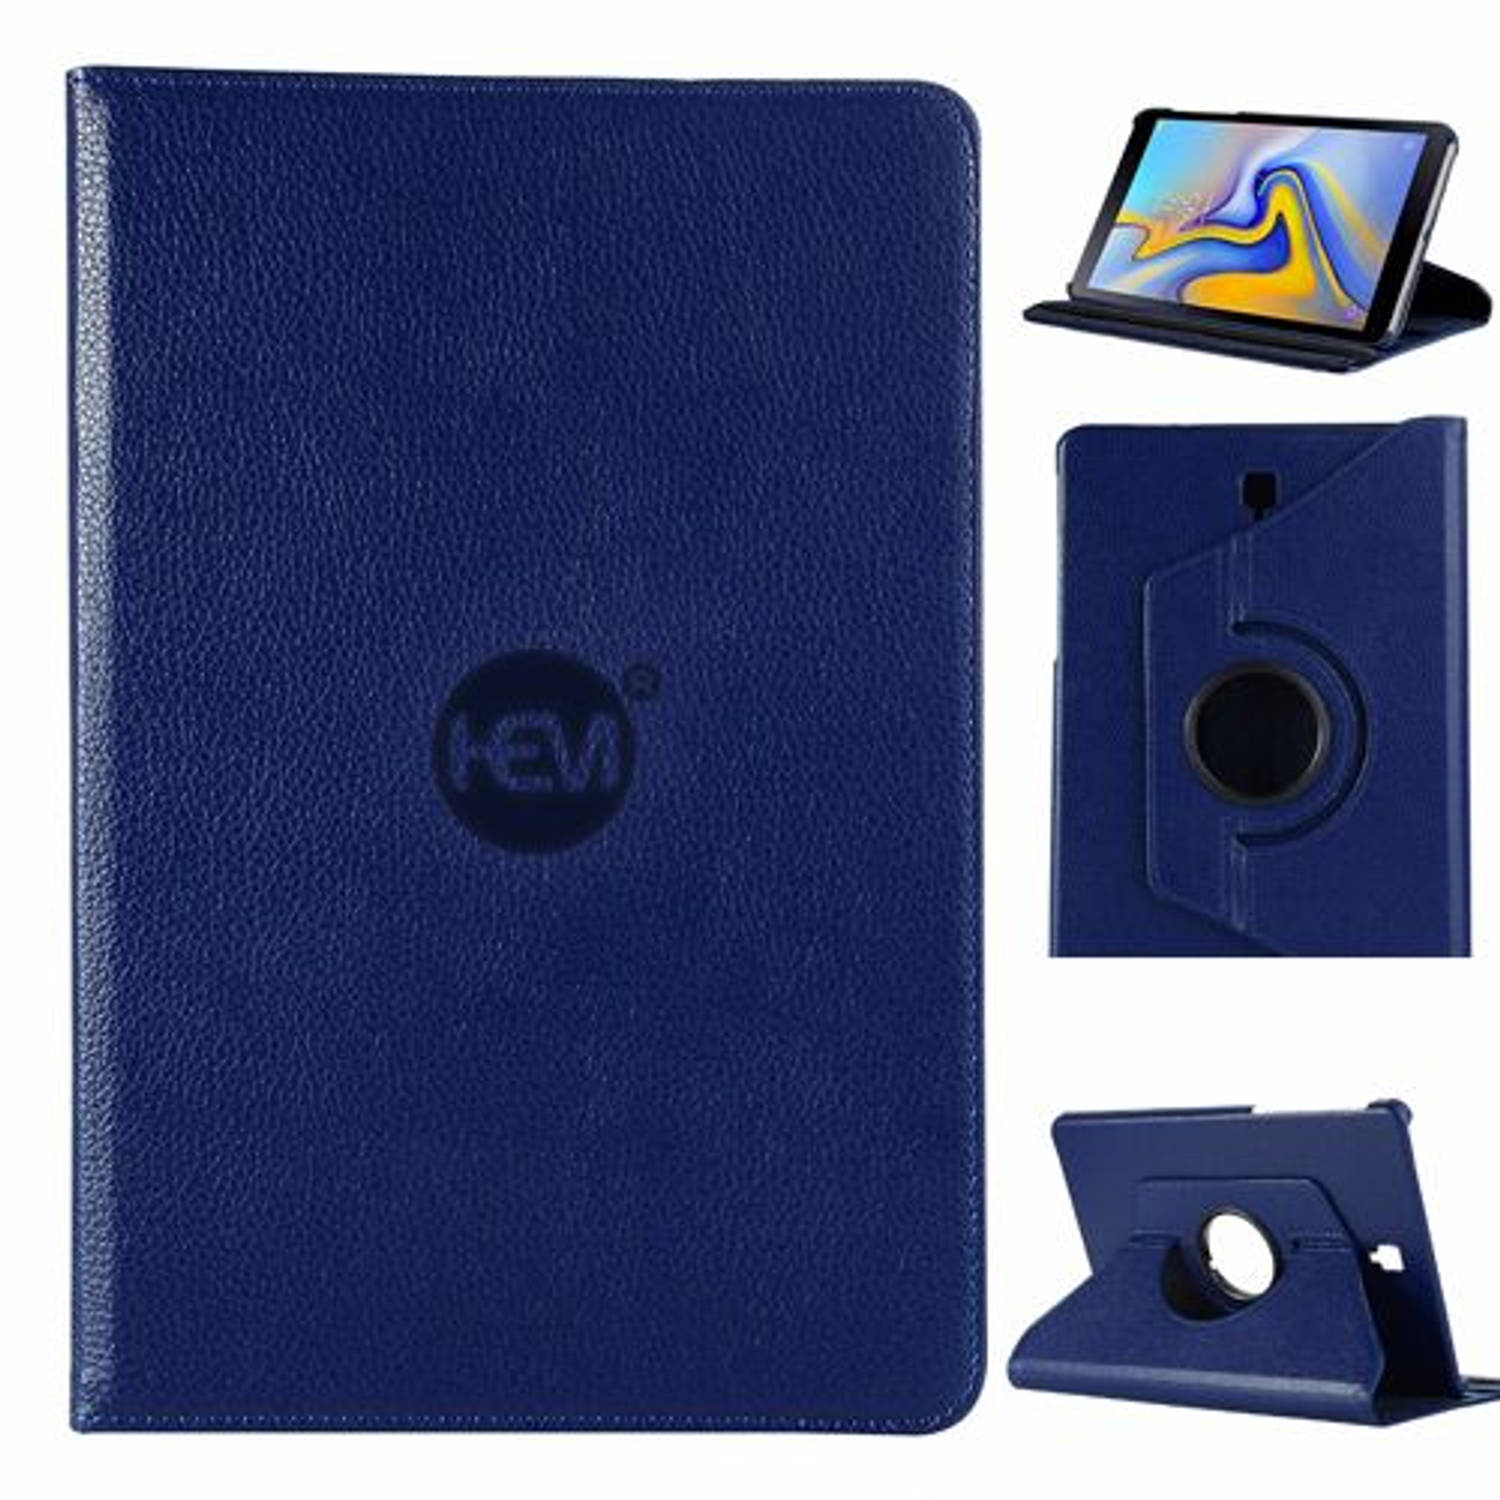 Samsung Galaxy Tab A 10.1 (2019) - T510/T515 Cover Donker Blauw - Ipad hoes, Tablethoes